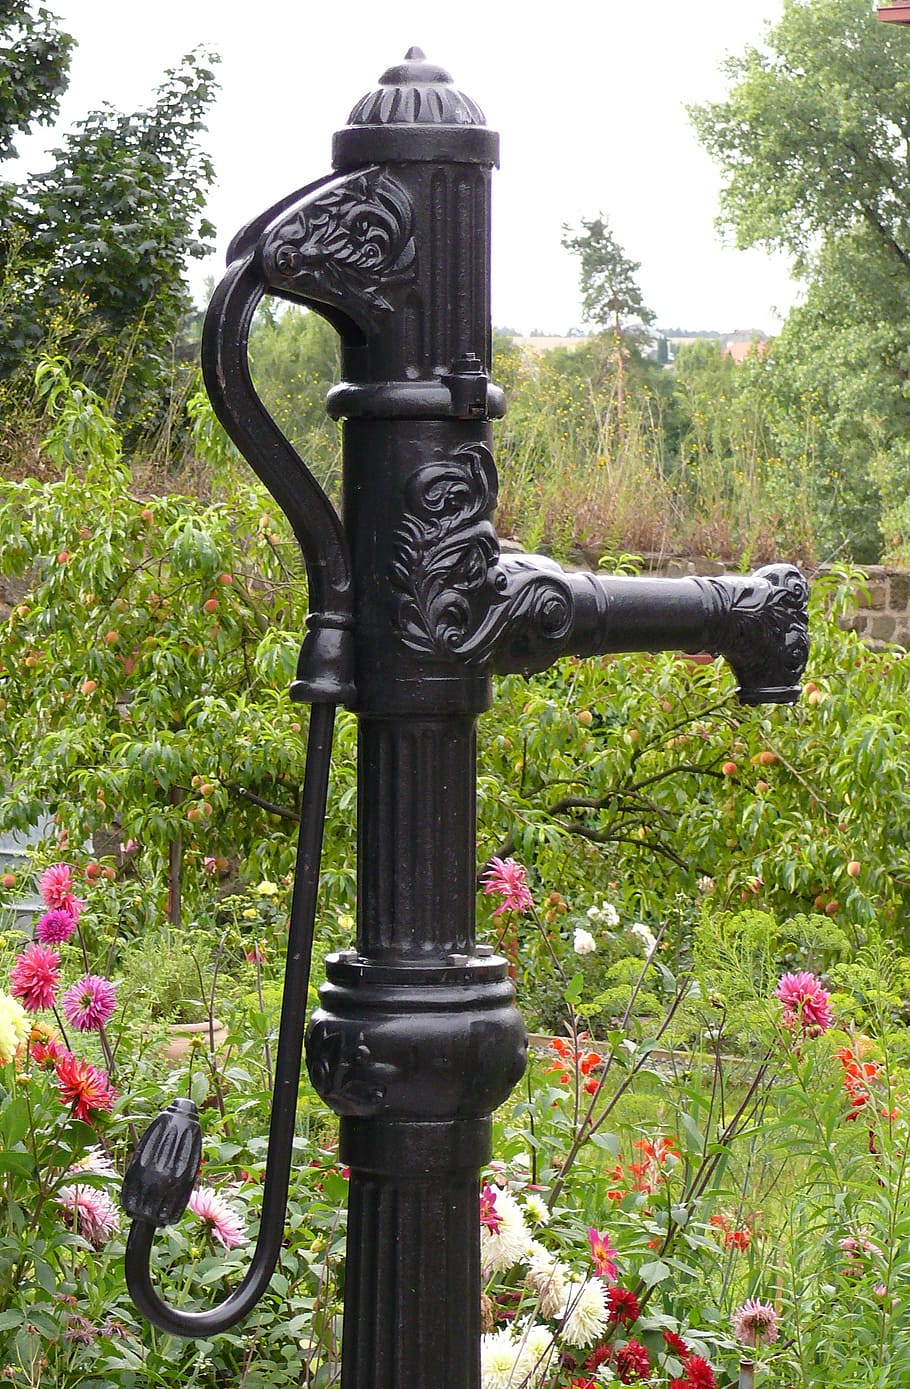 hand pump, tube well, well, pump, water, manual, pipe, traditional, water-pump, obsolete